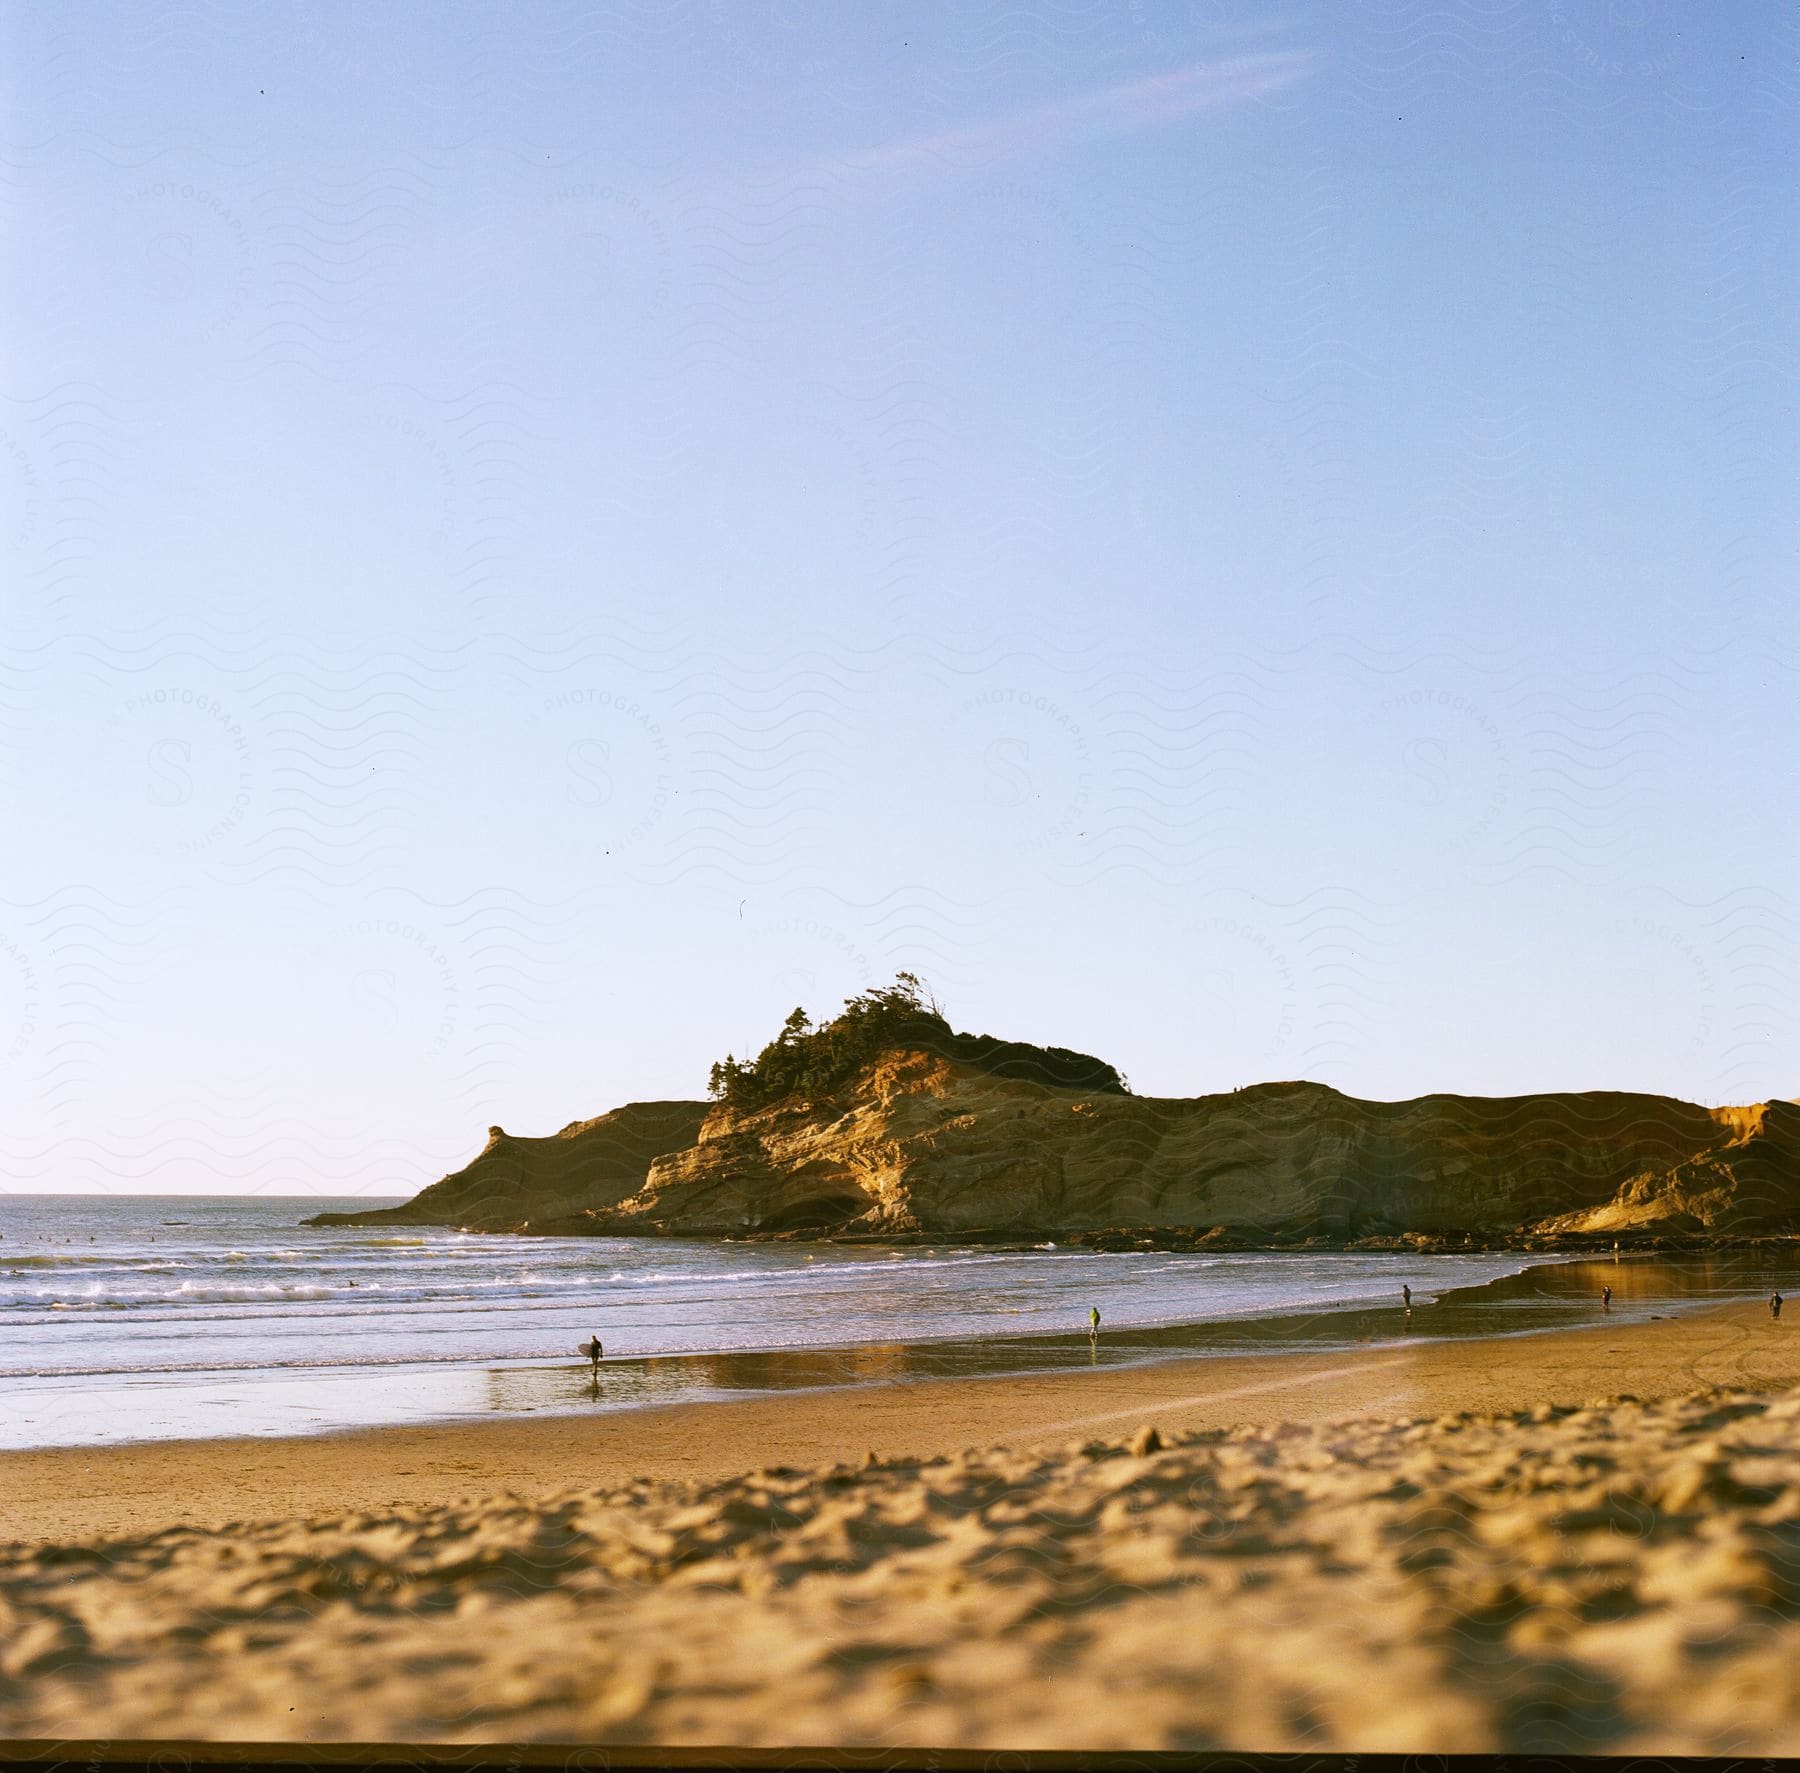 natural landscape shot of a beach next to a promontory with people walking around the sand and one of them carrying a surfboard during day time